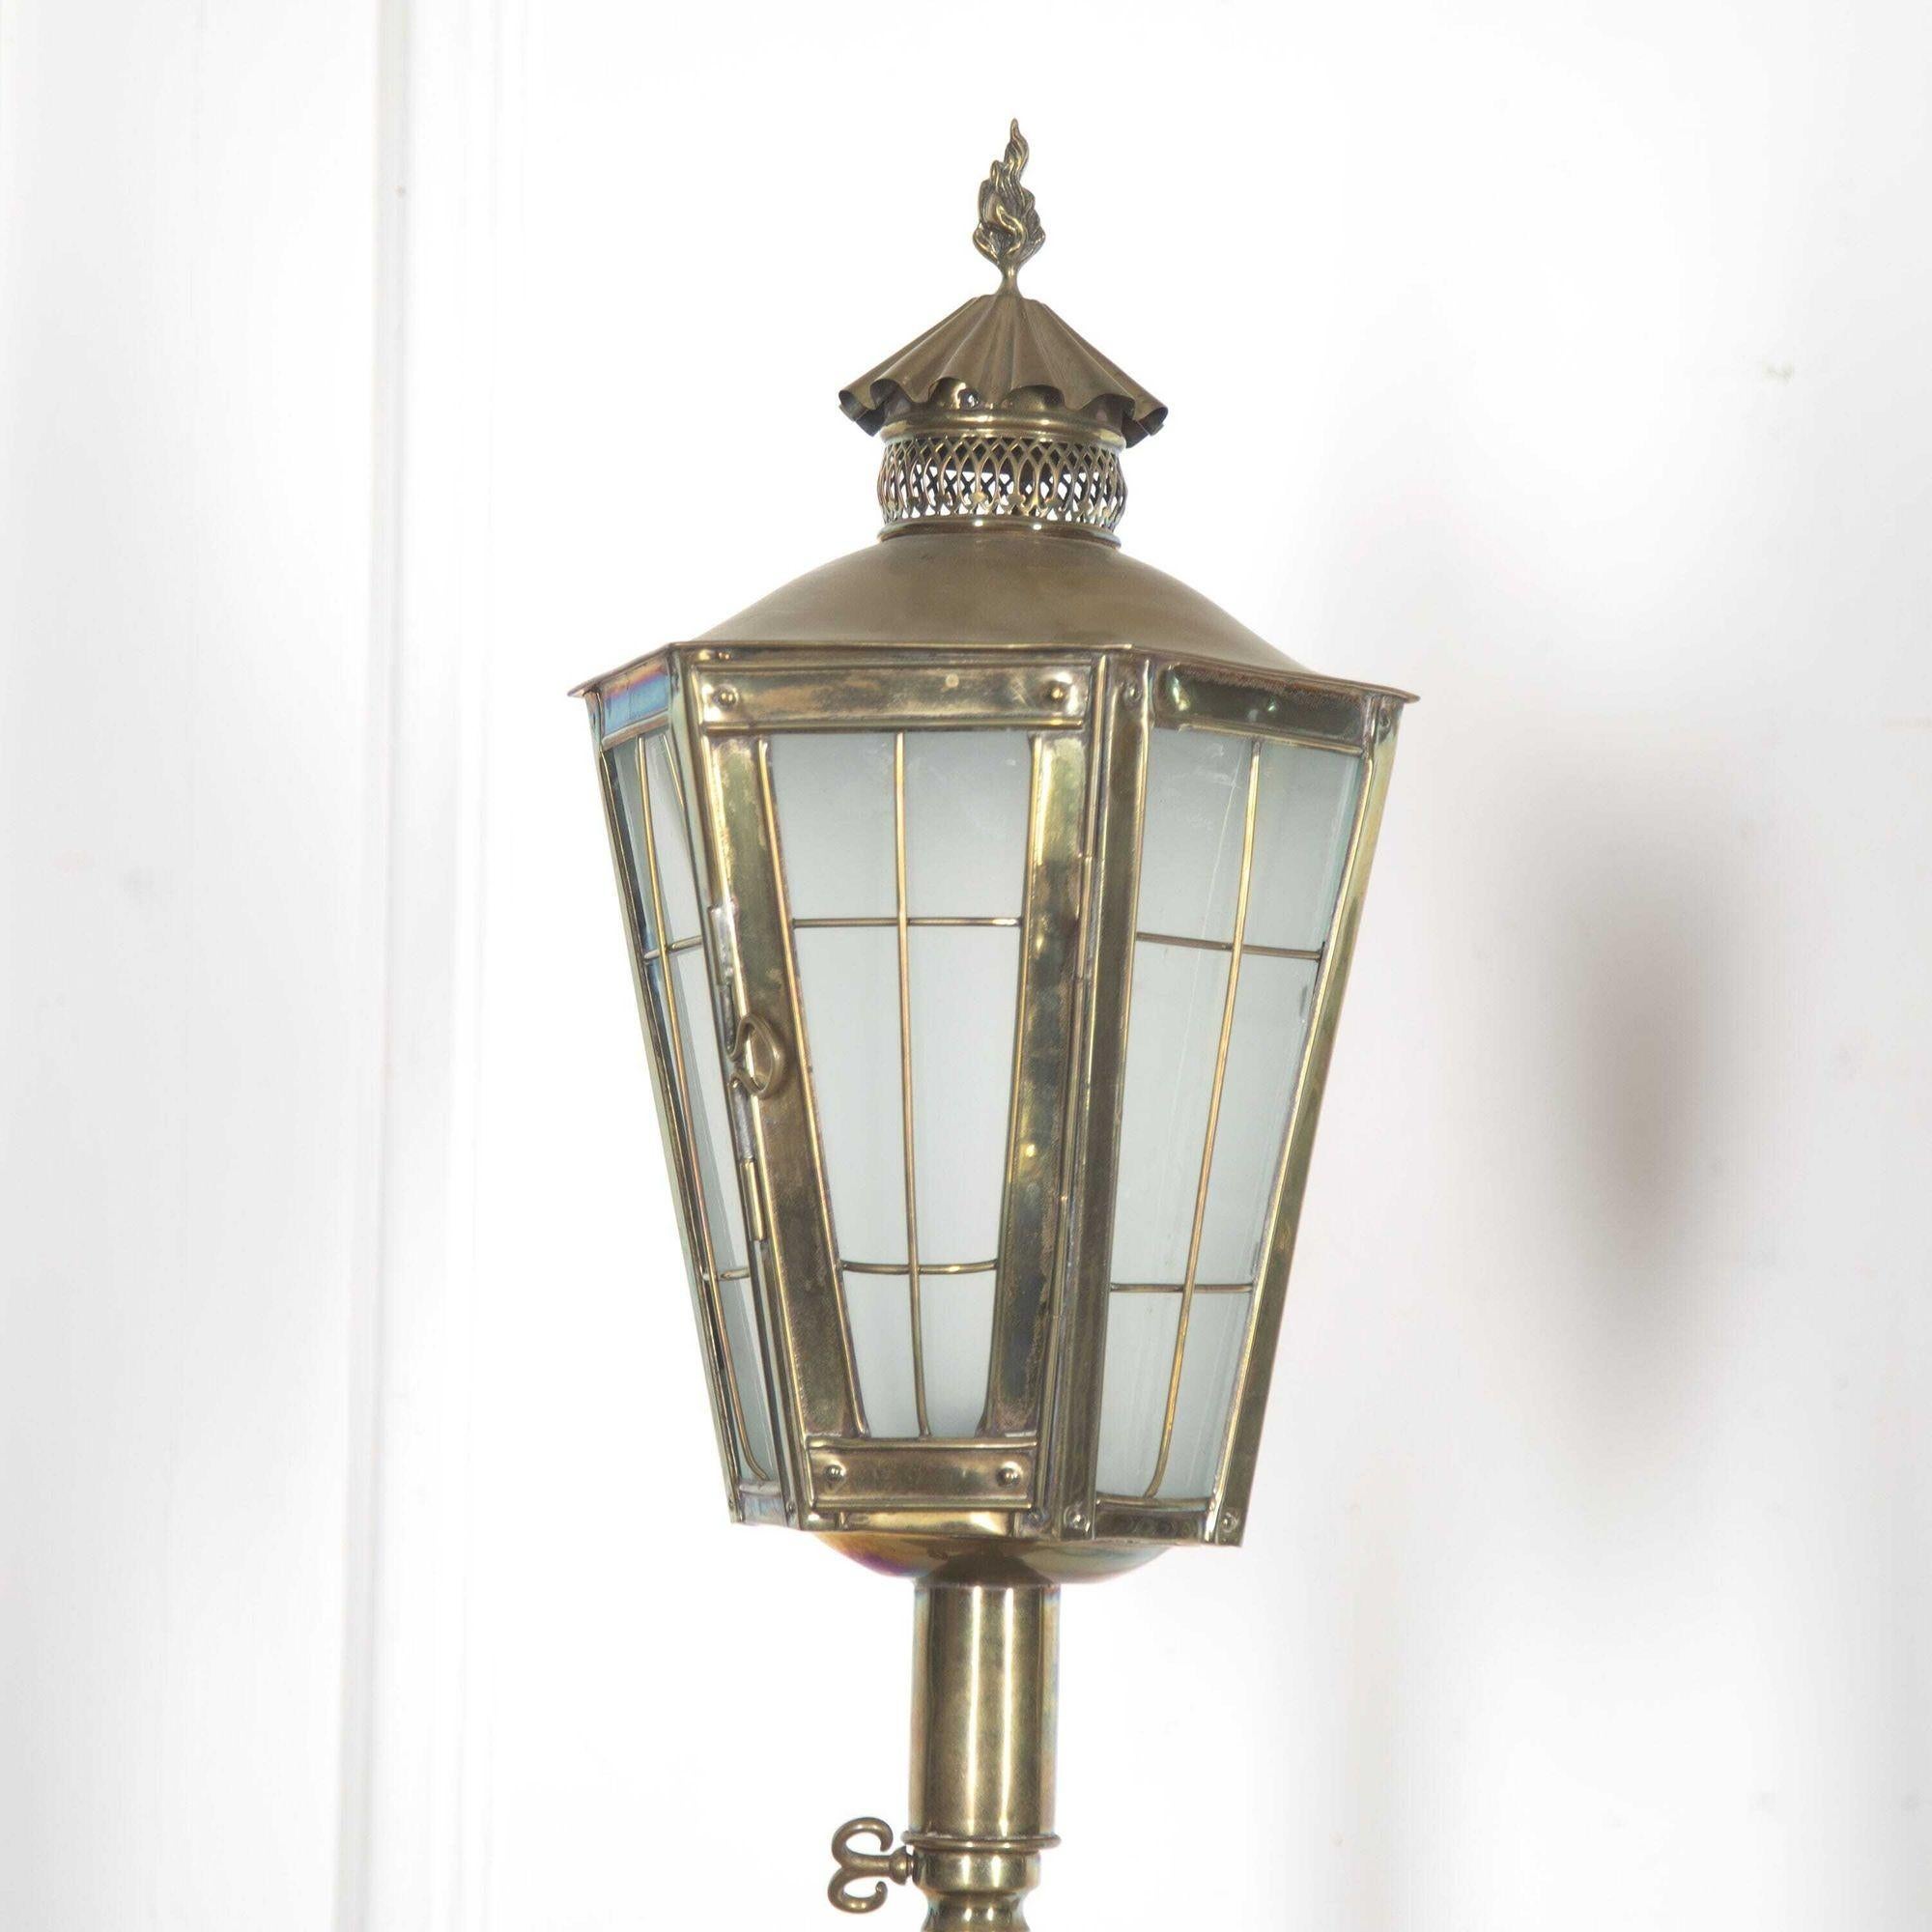 Wonderful pair of English brass standing lanterns, circa 1920. 
These lanterns have a tapered glazed body with an opening door and a finely pierced chimney. These chimneys are topped with a cast brass flame.
The glass panels are smoked so that